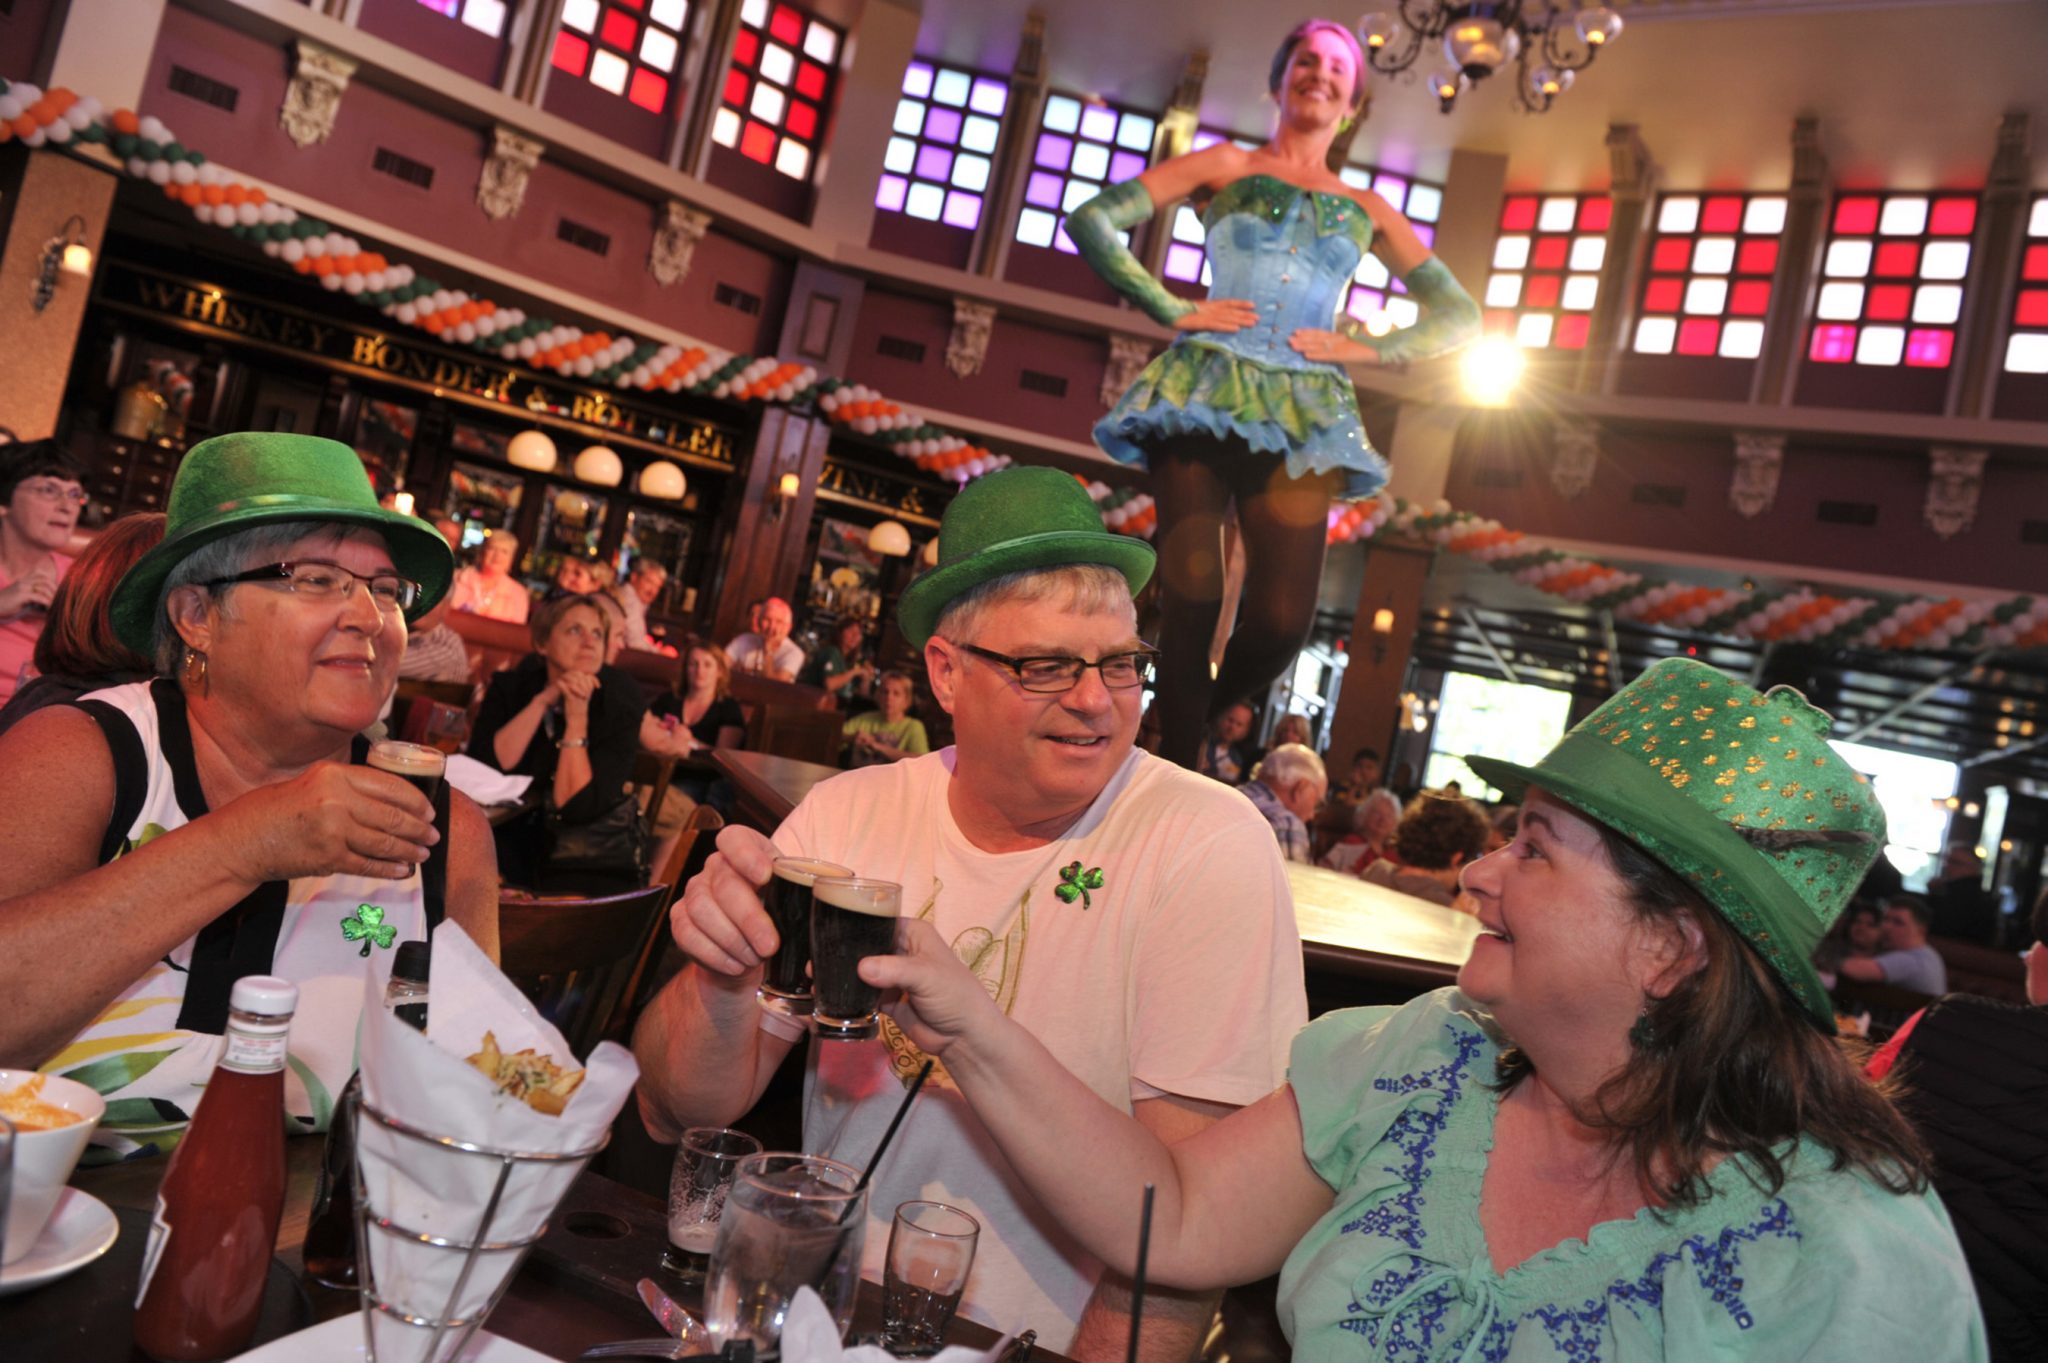 ResortLoop.com Episode 419 – Let’s Spend St. Paddy’s Day With Disney